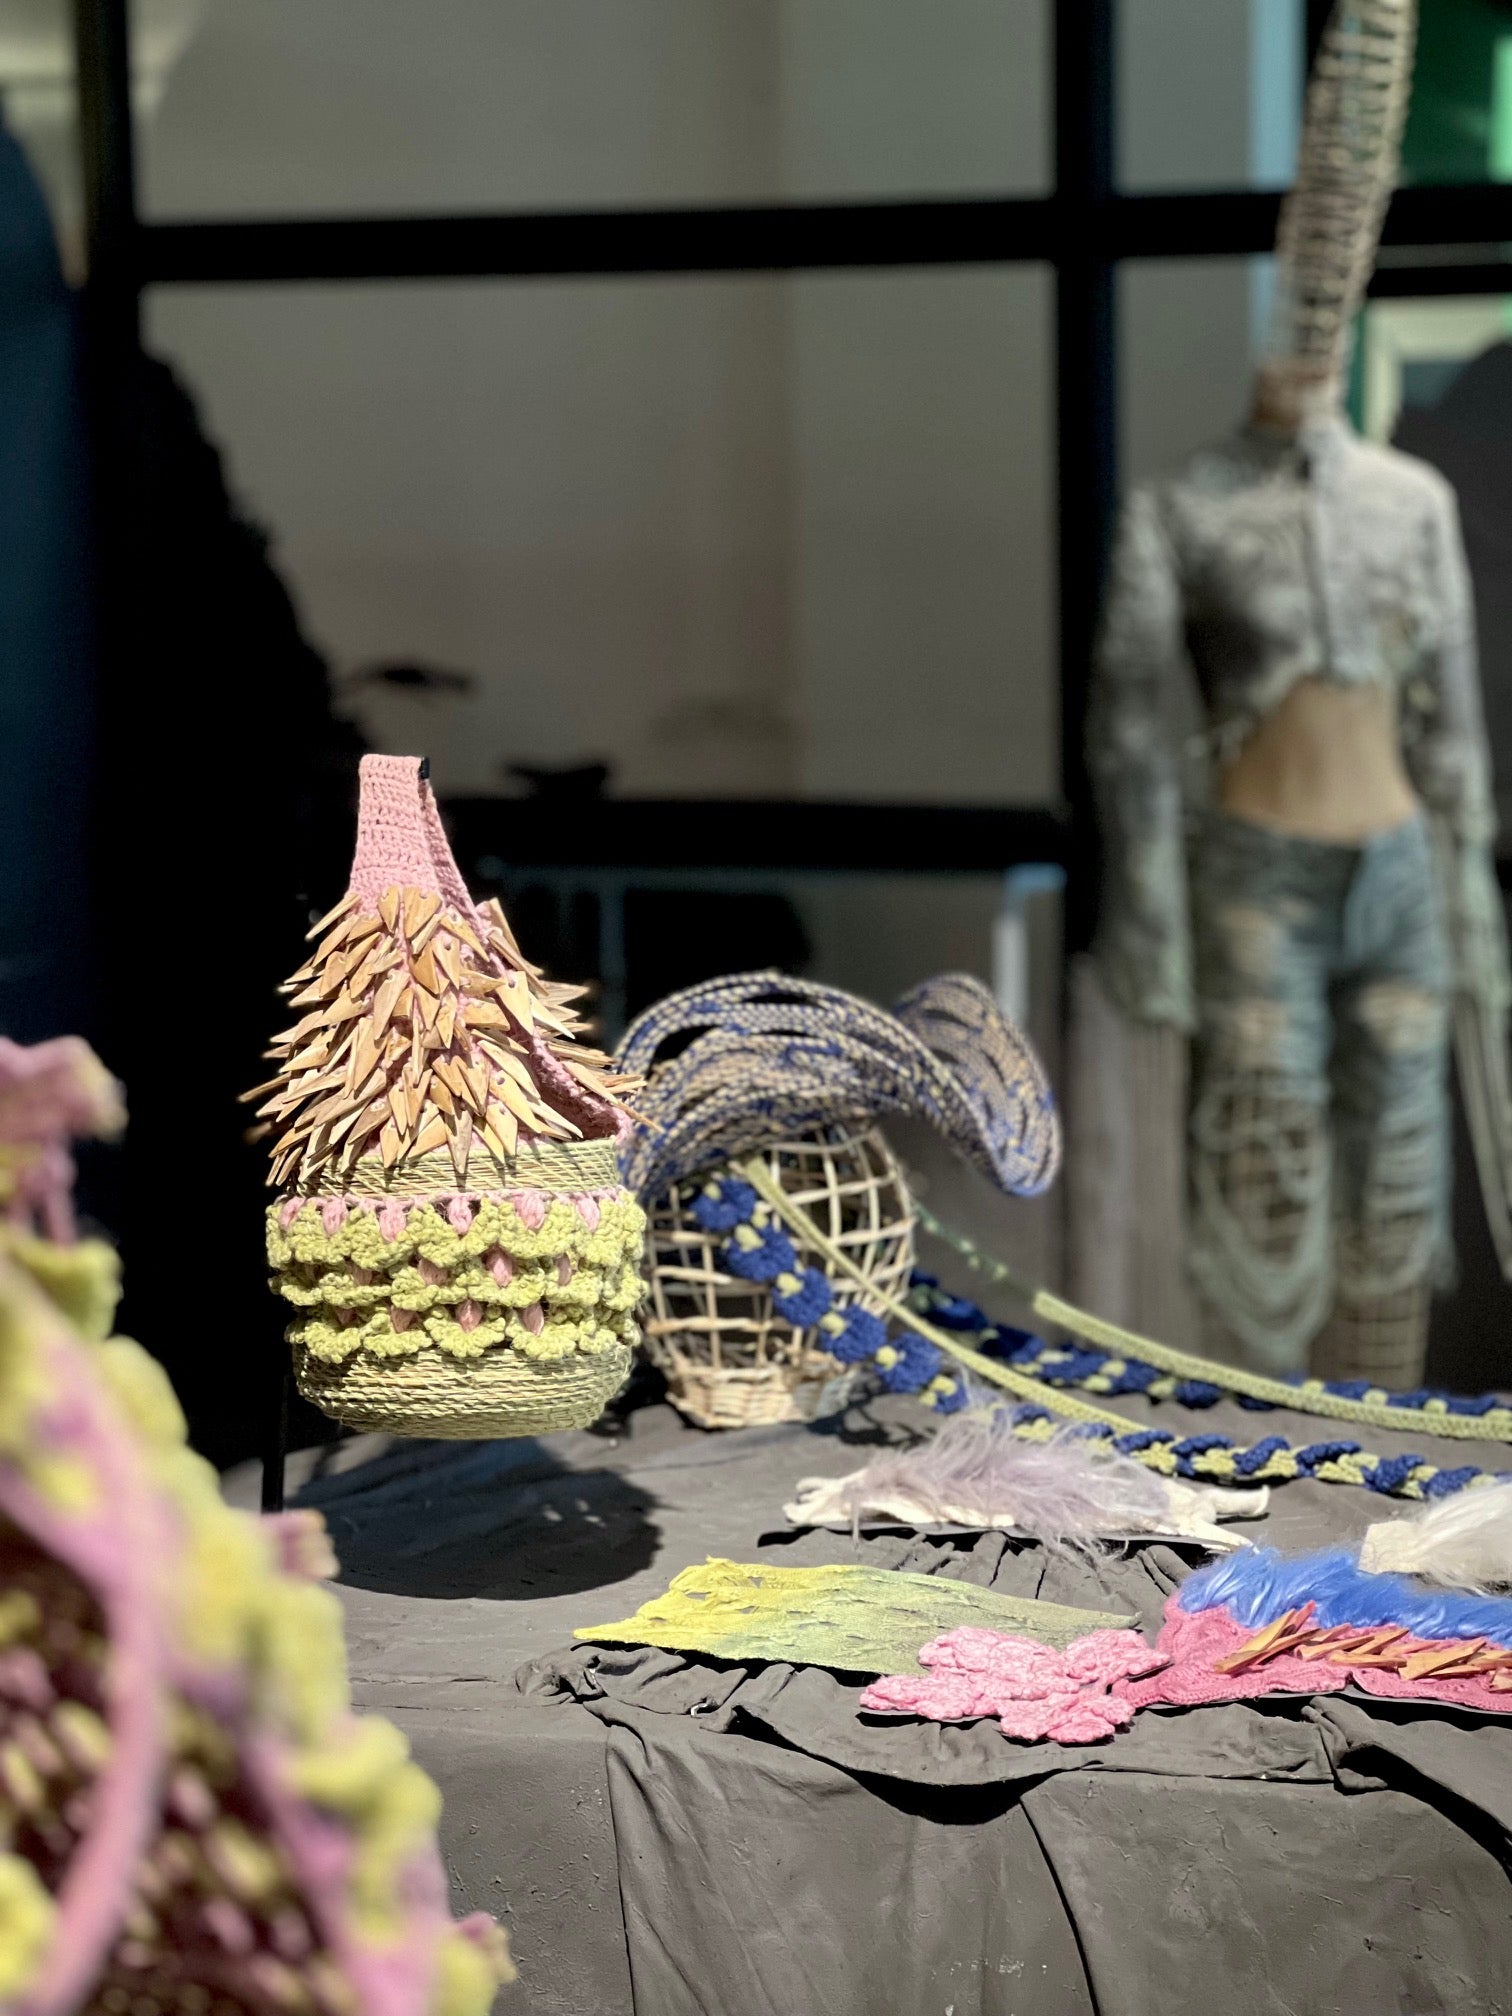 Showcase of the TABERNAS hat, green and pink crochet bag adored with hand cut Almería canes and REGENERATIVE FOLKLORE textile samples at Dutch Design Week.